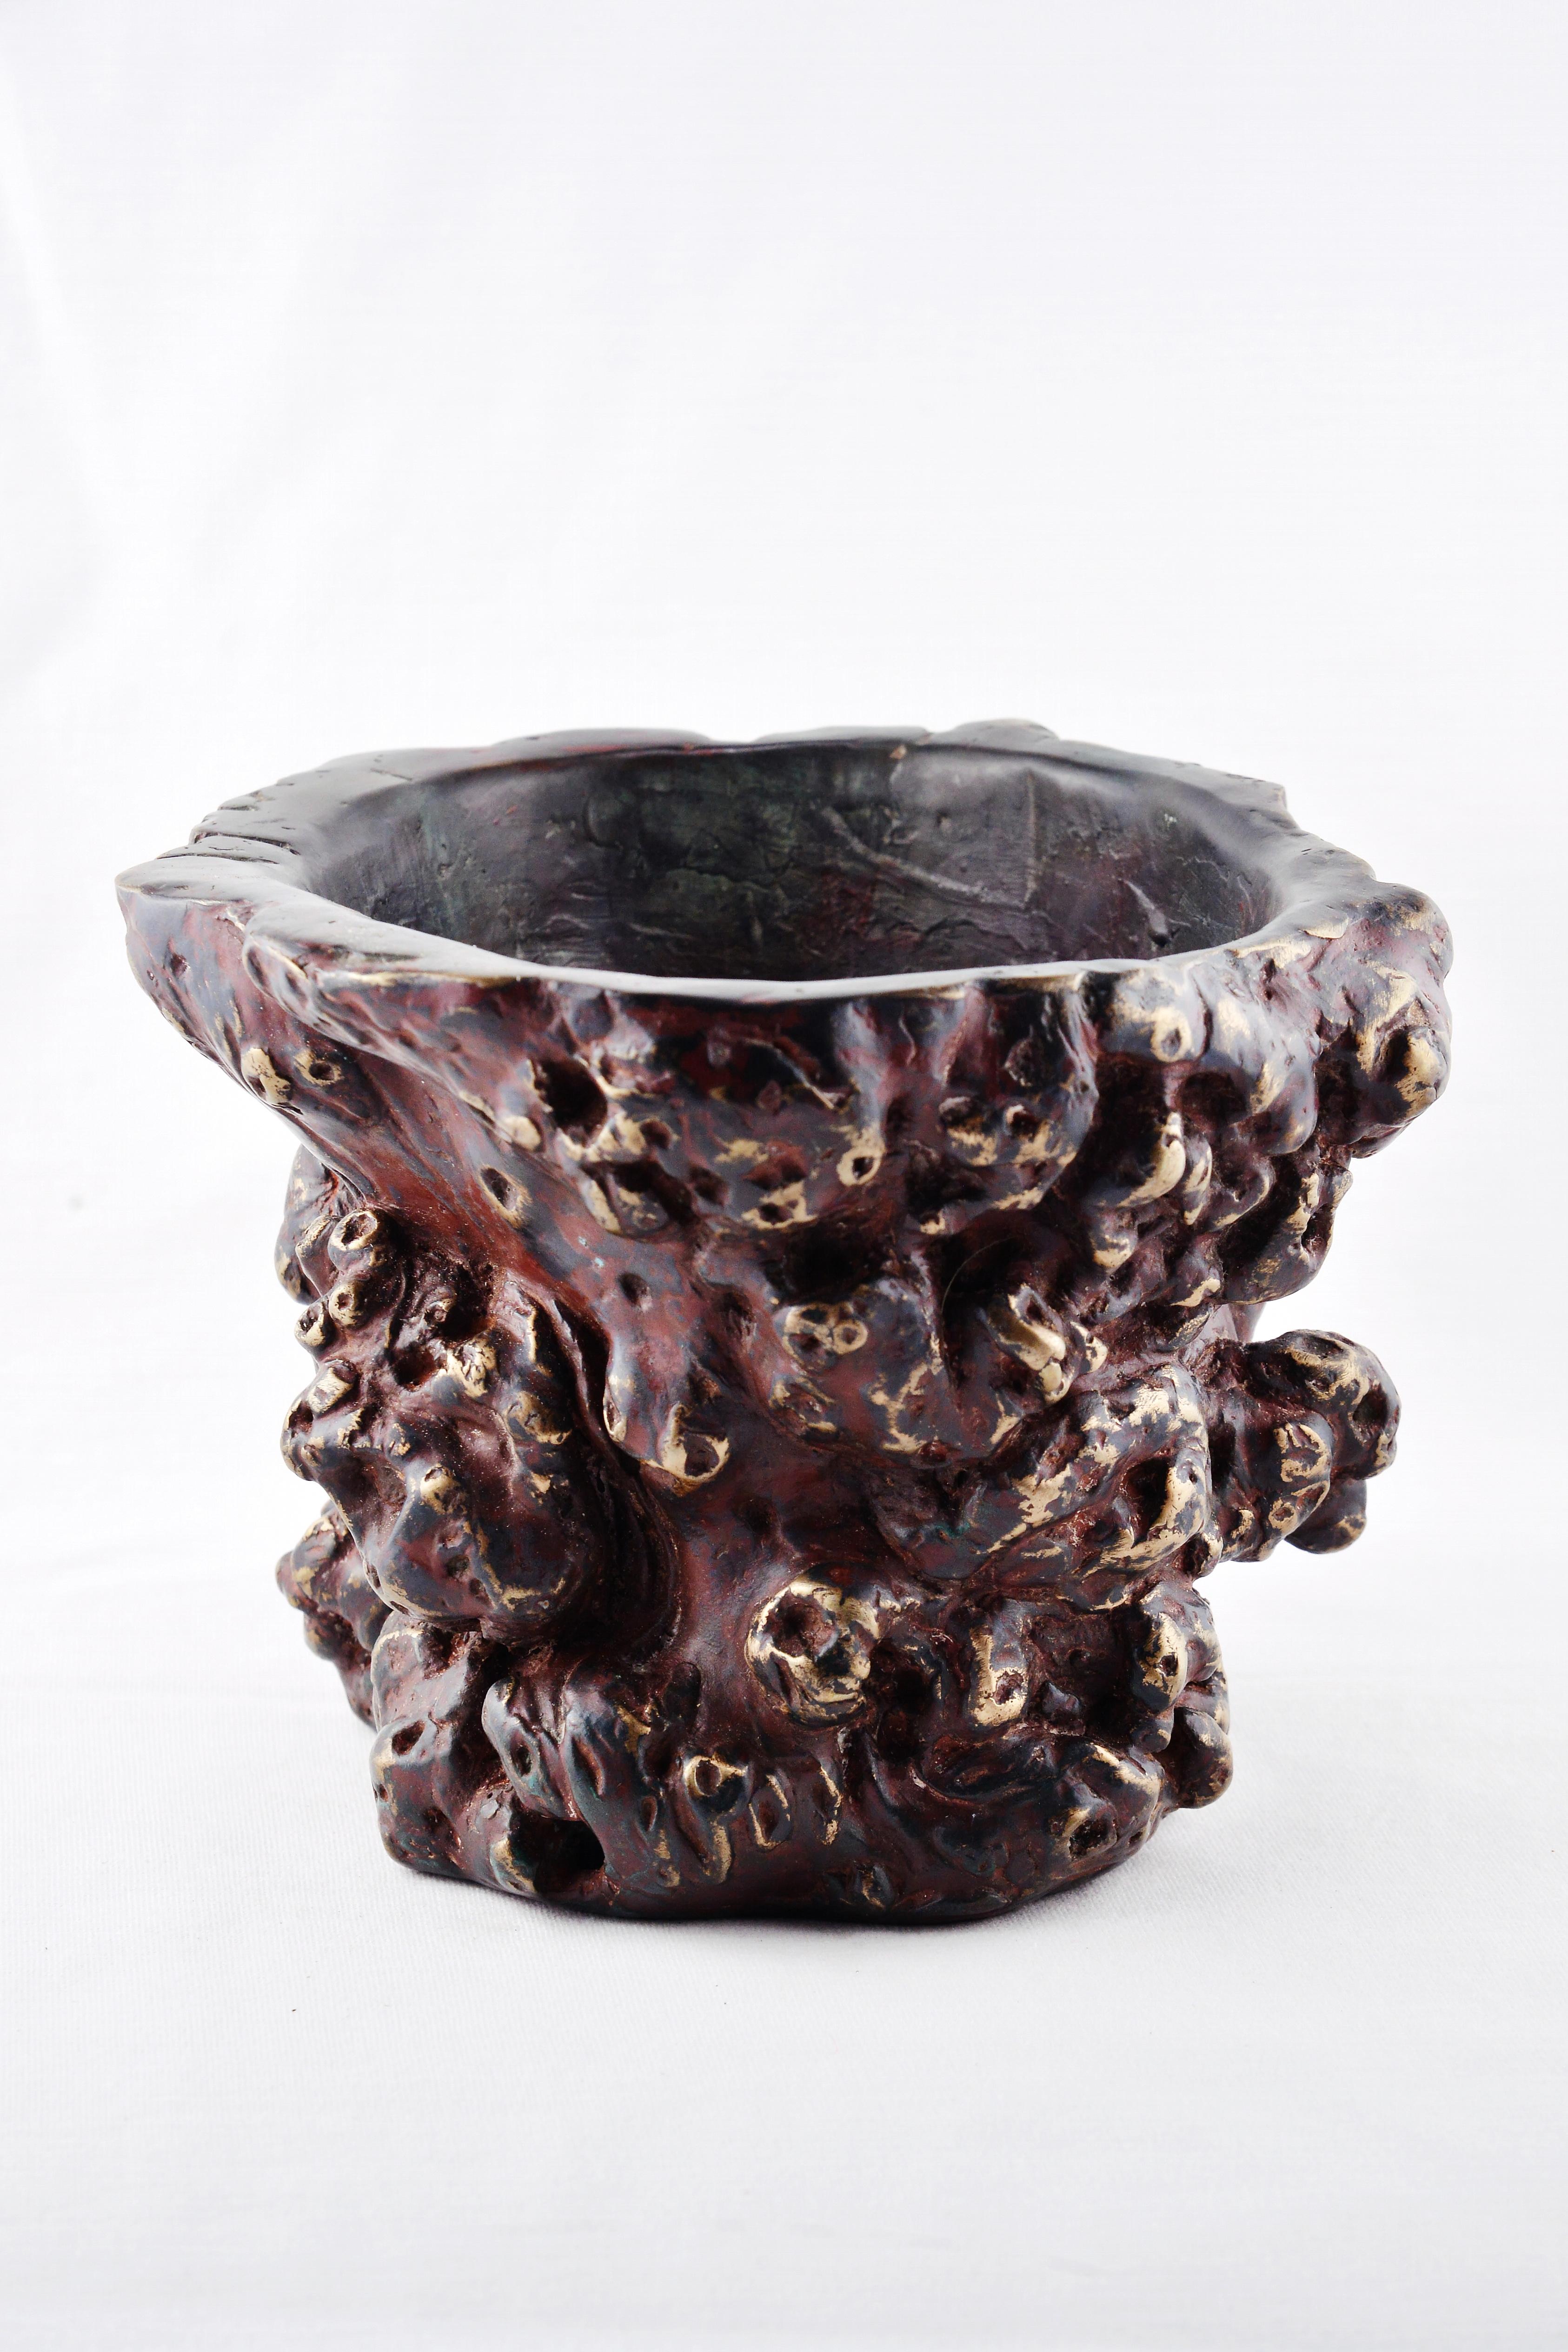 Modern Bronze reproduction of a 17th Century Chinese Brush Pot by Armando Benato For Sale